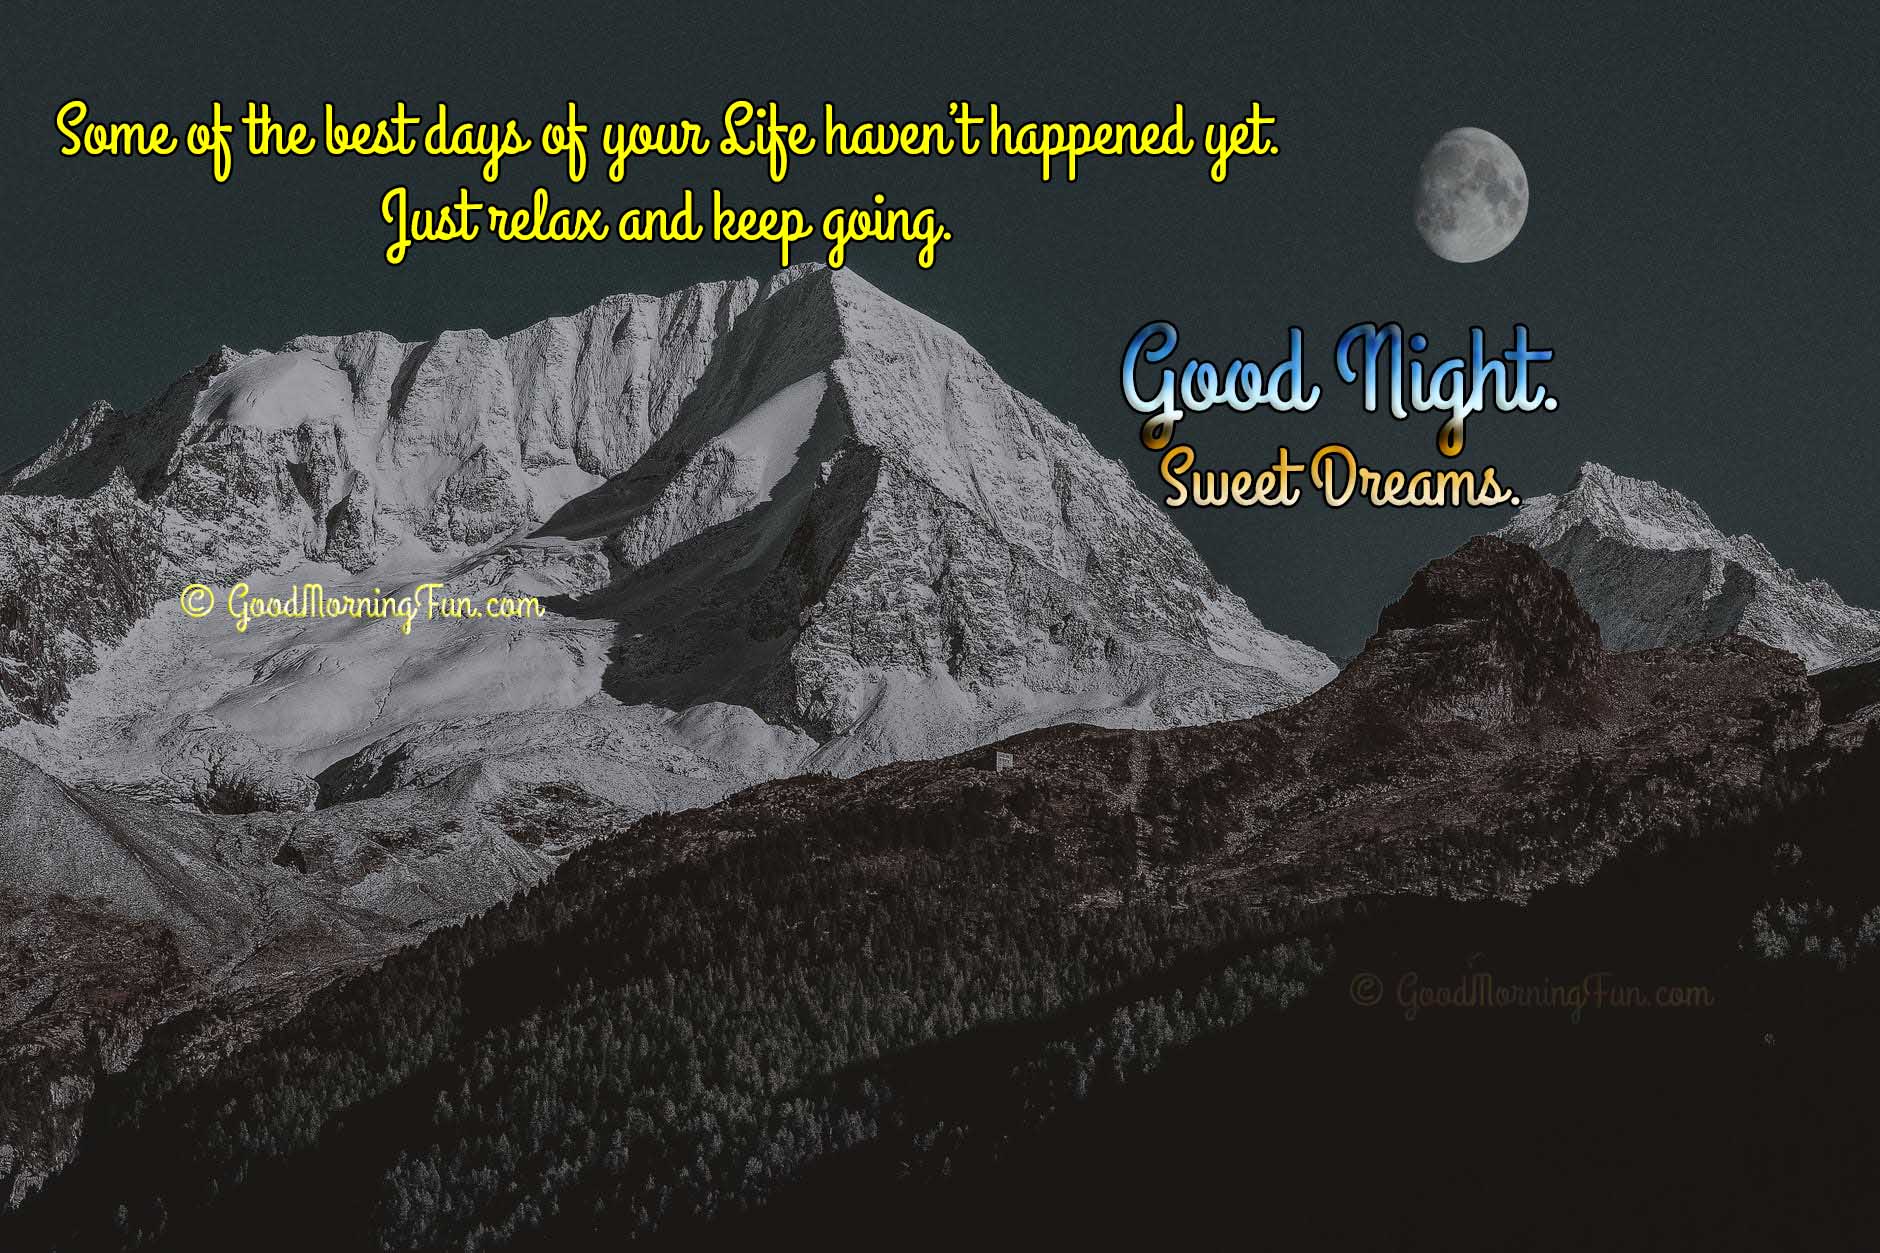 Inspirational Good Night Quotes - Best days are coming.jpg